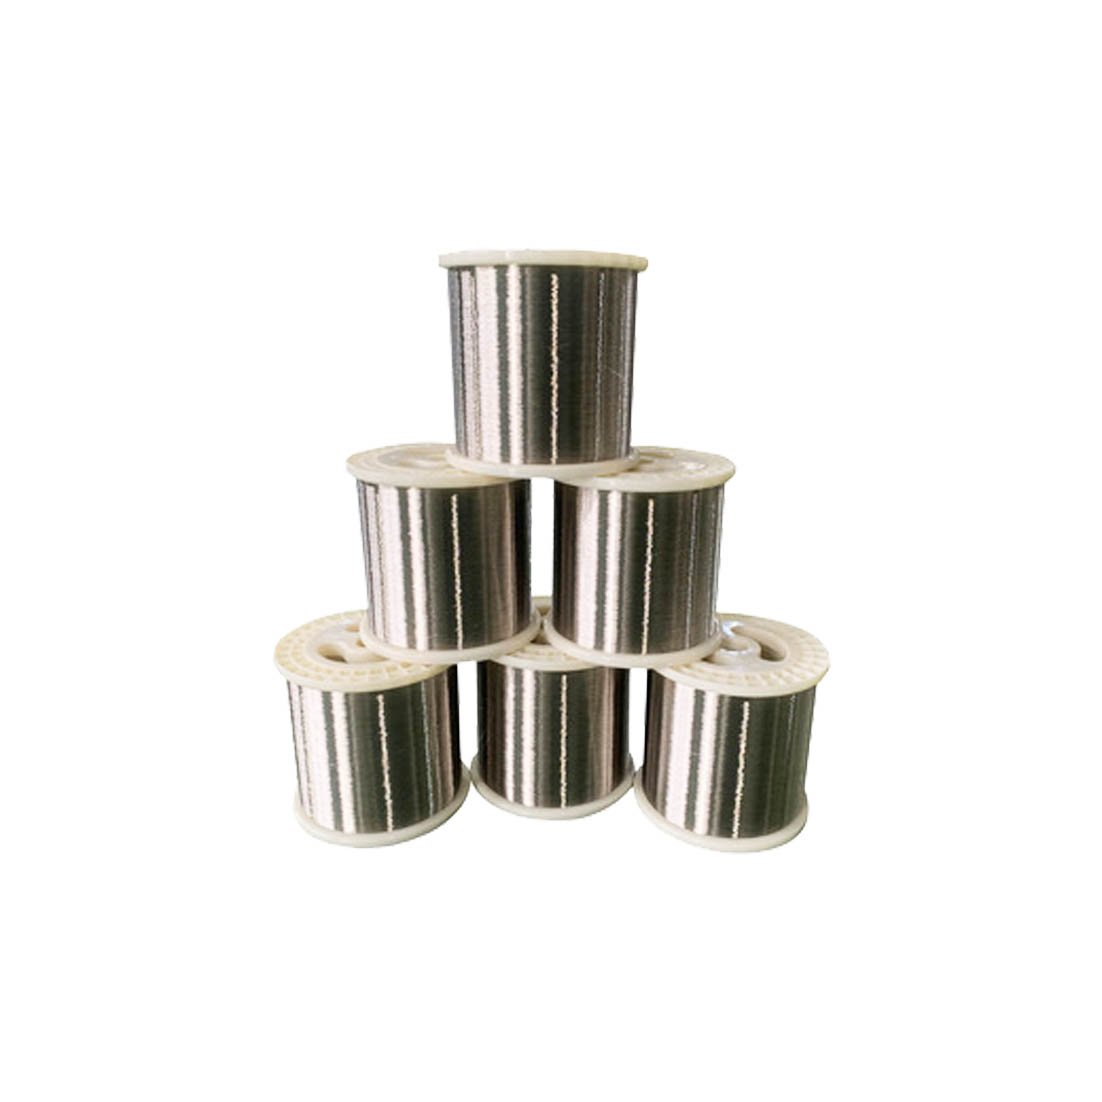 Nickel plated copper wire